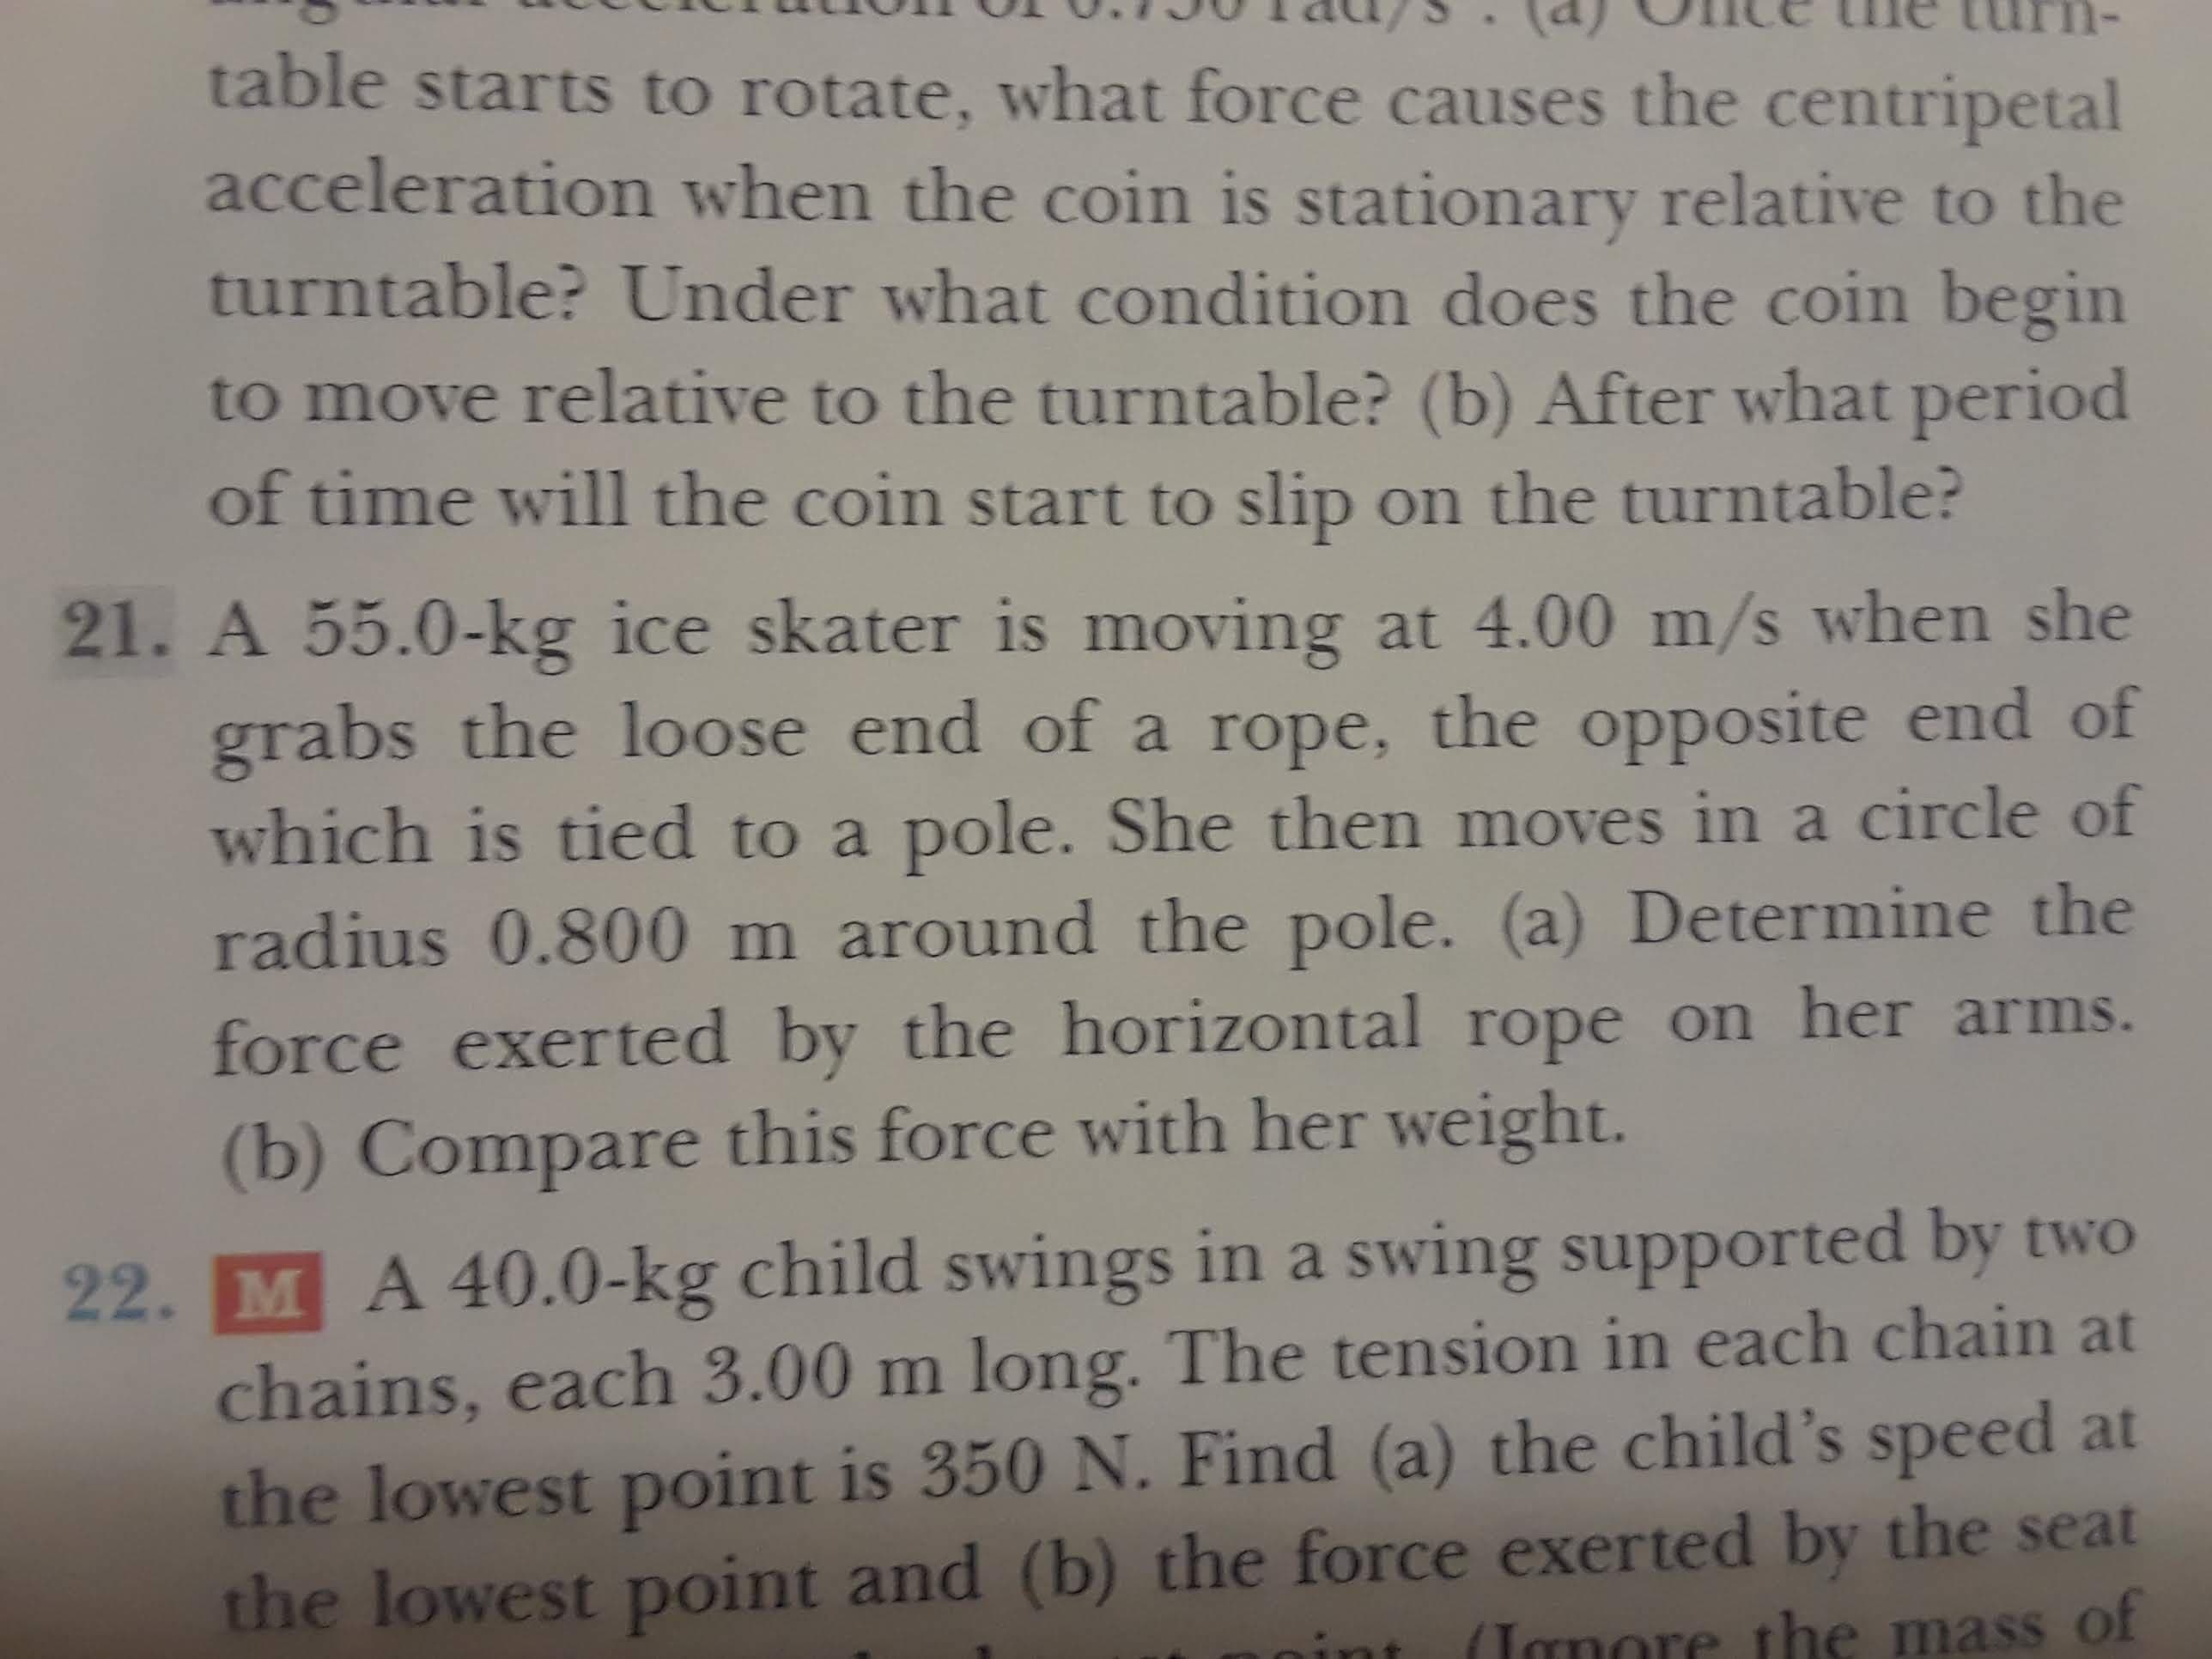 table starts to rotate, what force causes the centripetal
acceleration when the coin is stationary relative to the
turntable? Under what condition does the coin begin
to move relative to the turntable? (b) After what period
of time will the coin start to slip on the turntable?
21. A 55.0-kg ice skater is moving at 4.00 m/s when she
grabs the loose end of a rope, the opposite end of
which is tied to a pole. She then moves in a circle of
radius 0.800 m around the pole. (a) Determine the
force exerted by the horizontal rope on her arms.
(b) Compare this force with her weight.
22. M A 40.0-kg child swings in a swing supported by two
chains, each 3.00 m long. The tension in each chain at
the lowest point is 350 N. Find (a) the child's speed at
the lowest point and (b) the force exerted by the seat
(Janore the mass of
